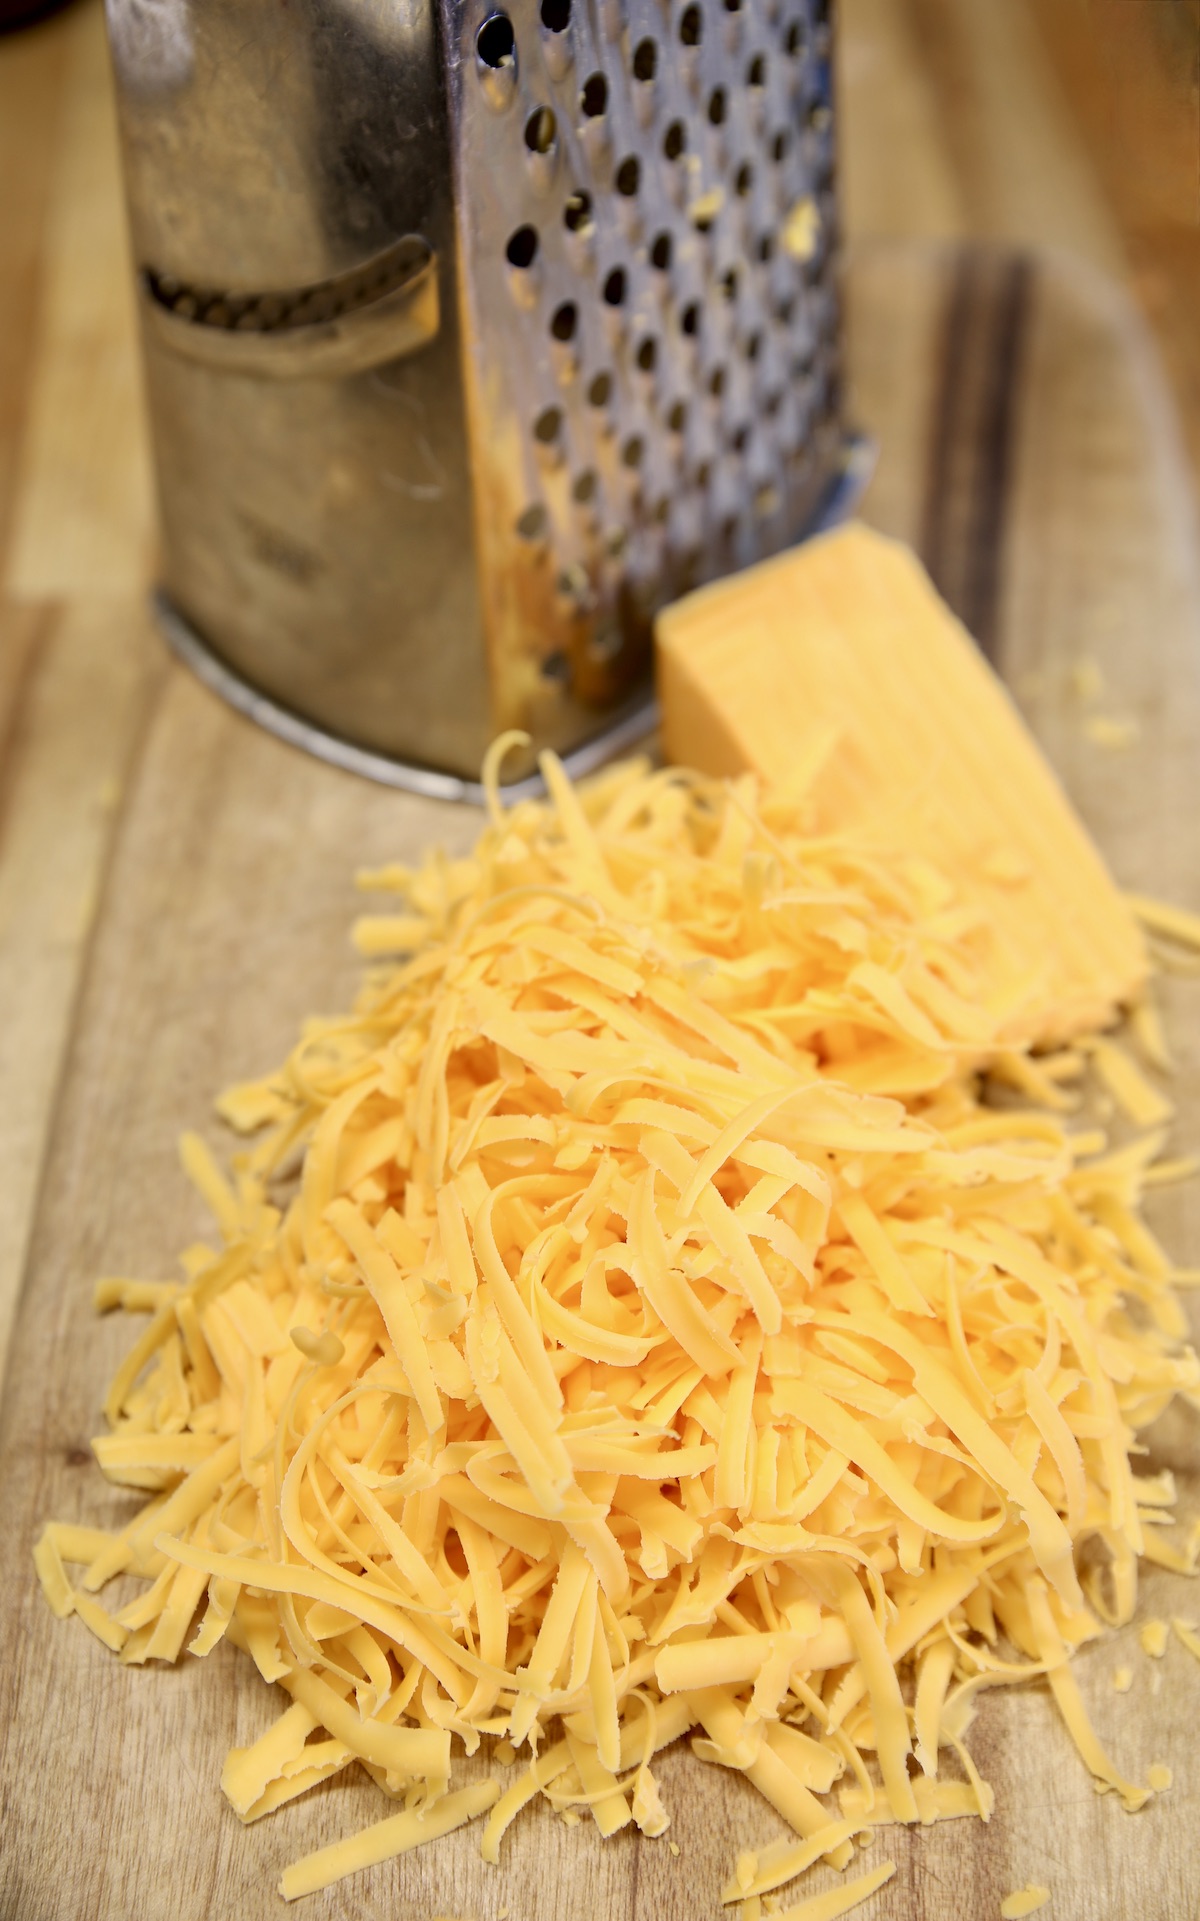 Box grater with chunk of cheddar, shredded.